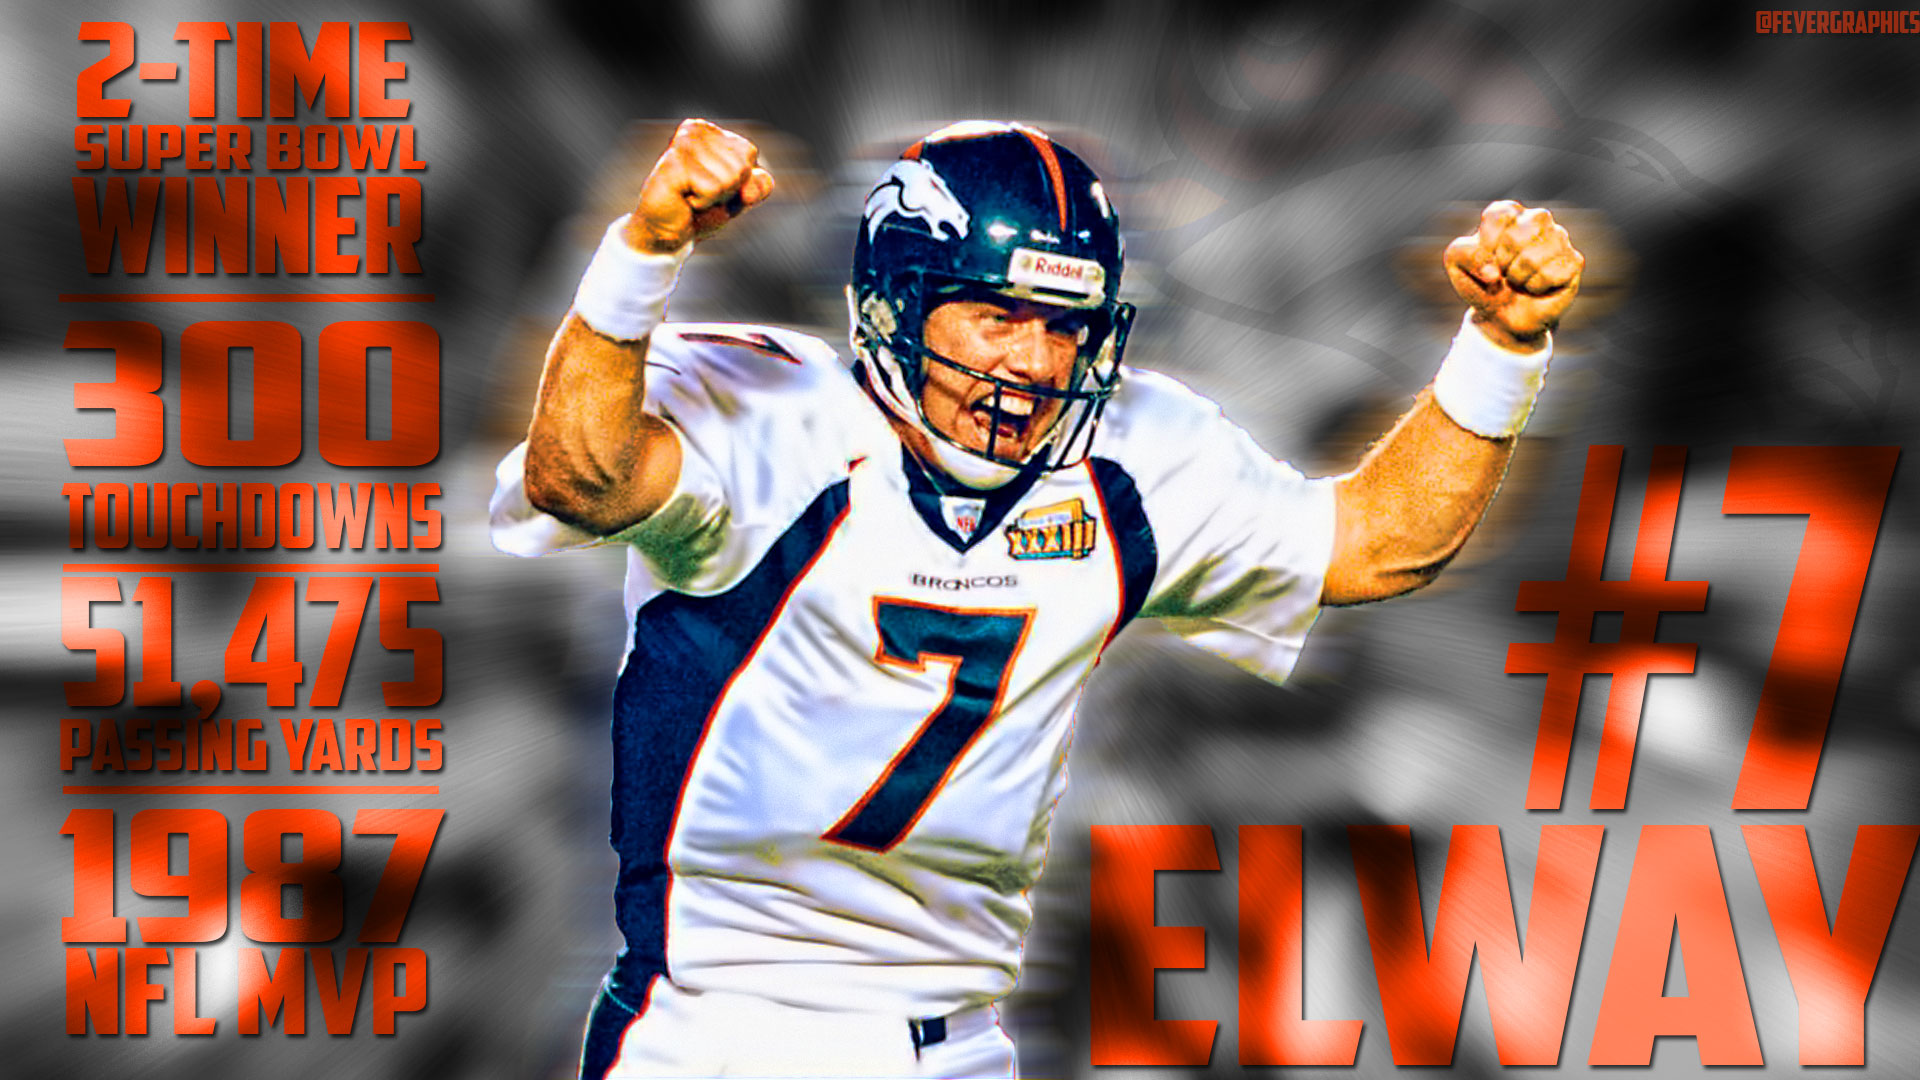 John Elway Wallpaper For This Broncos Sub I Hope You Guys Like It